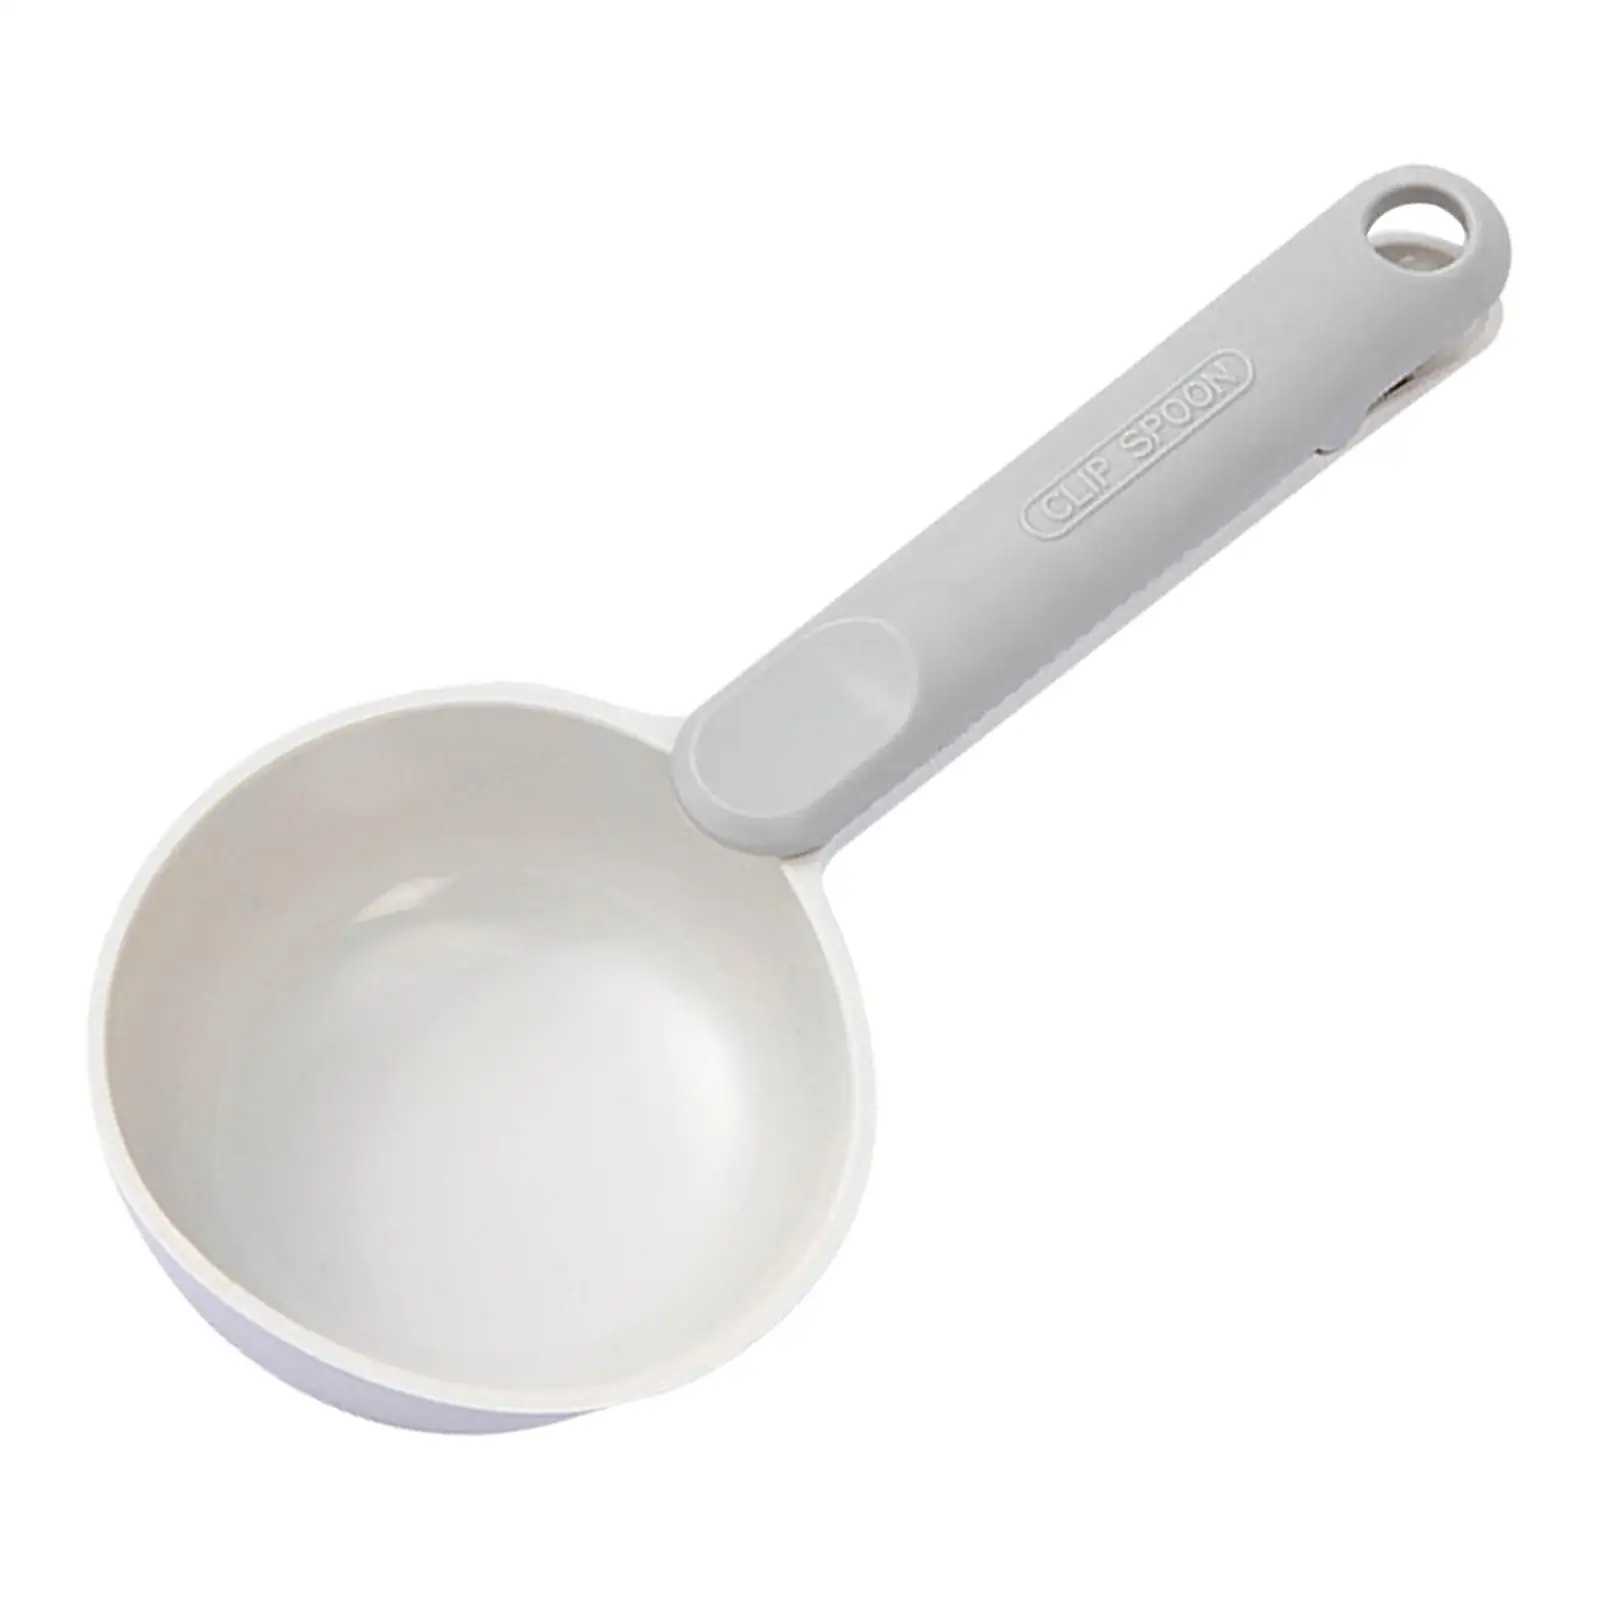 Multipurpose Kitchen Scoop Rice Spoon Flour Spoon with Clip Practical Kitchen Gadgets Flat Bottom Designed Smooth Edges Reusable